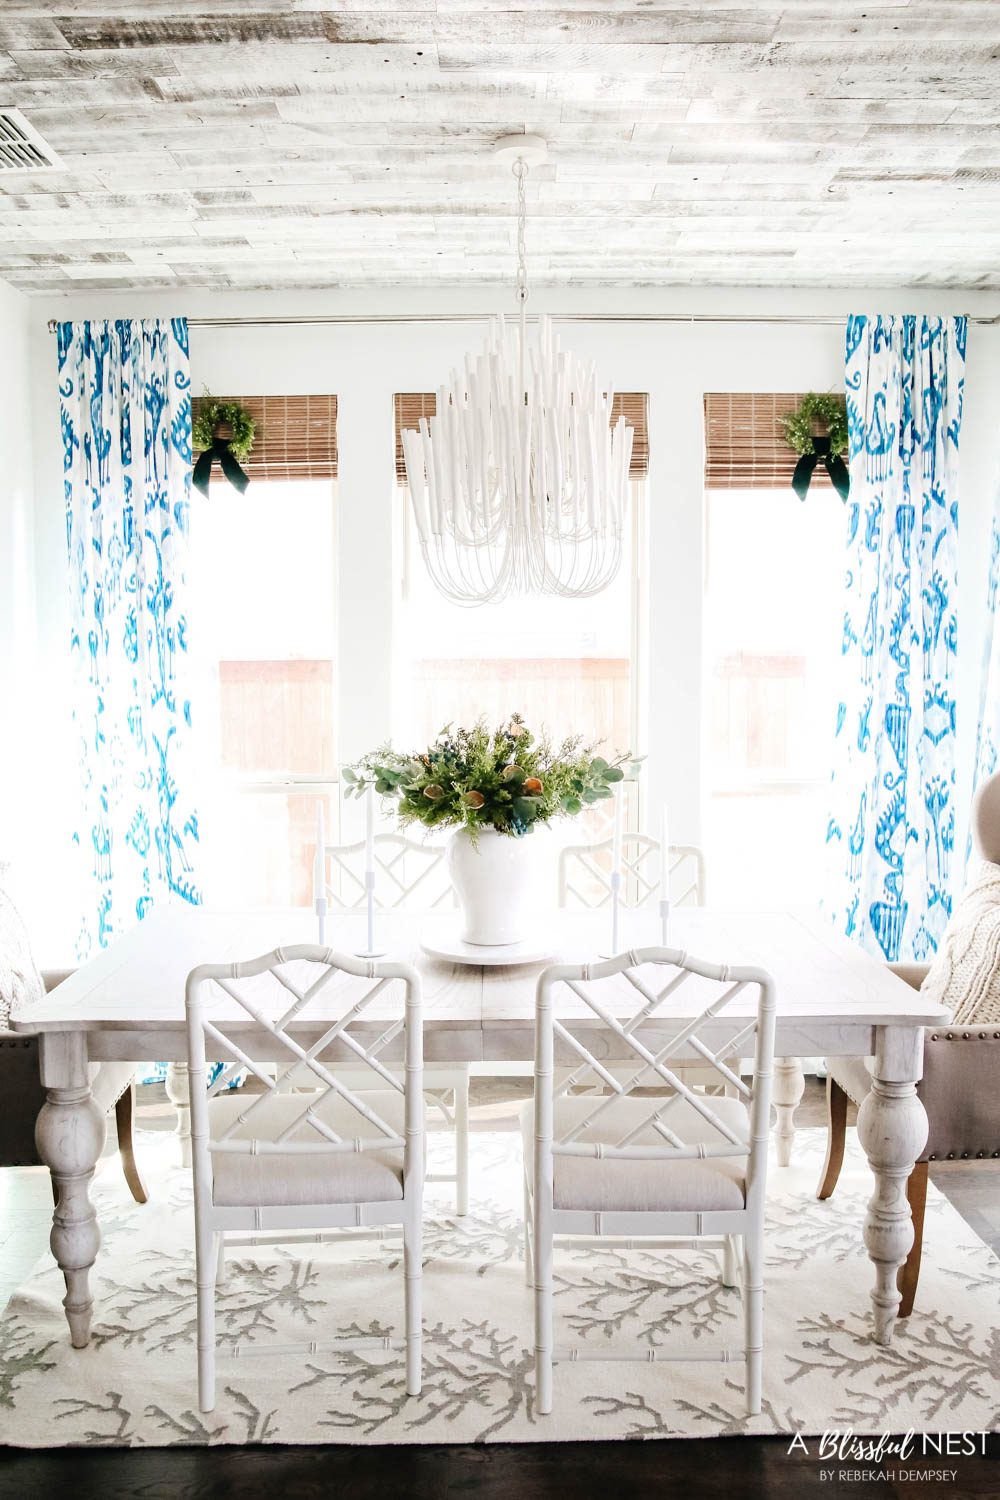 Dining room with white bamboo chairs and blue and white drapes. Simple white candles sticks next to a white vase with juniper floral picks. 